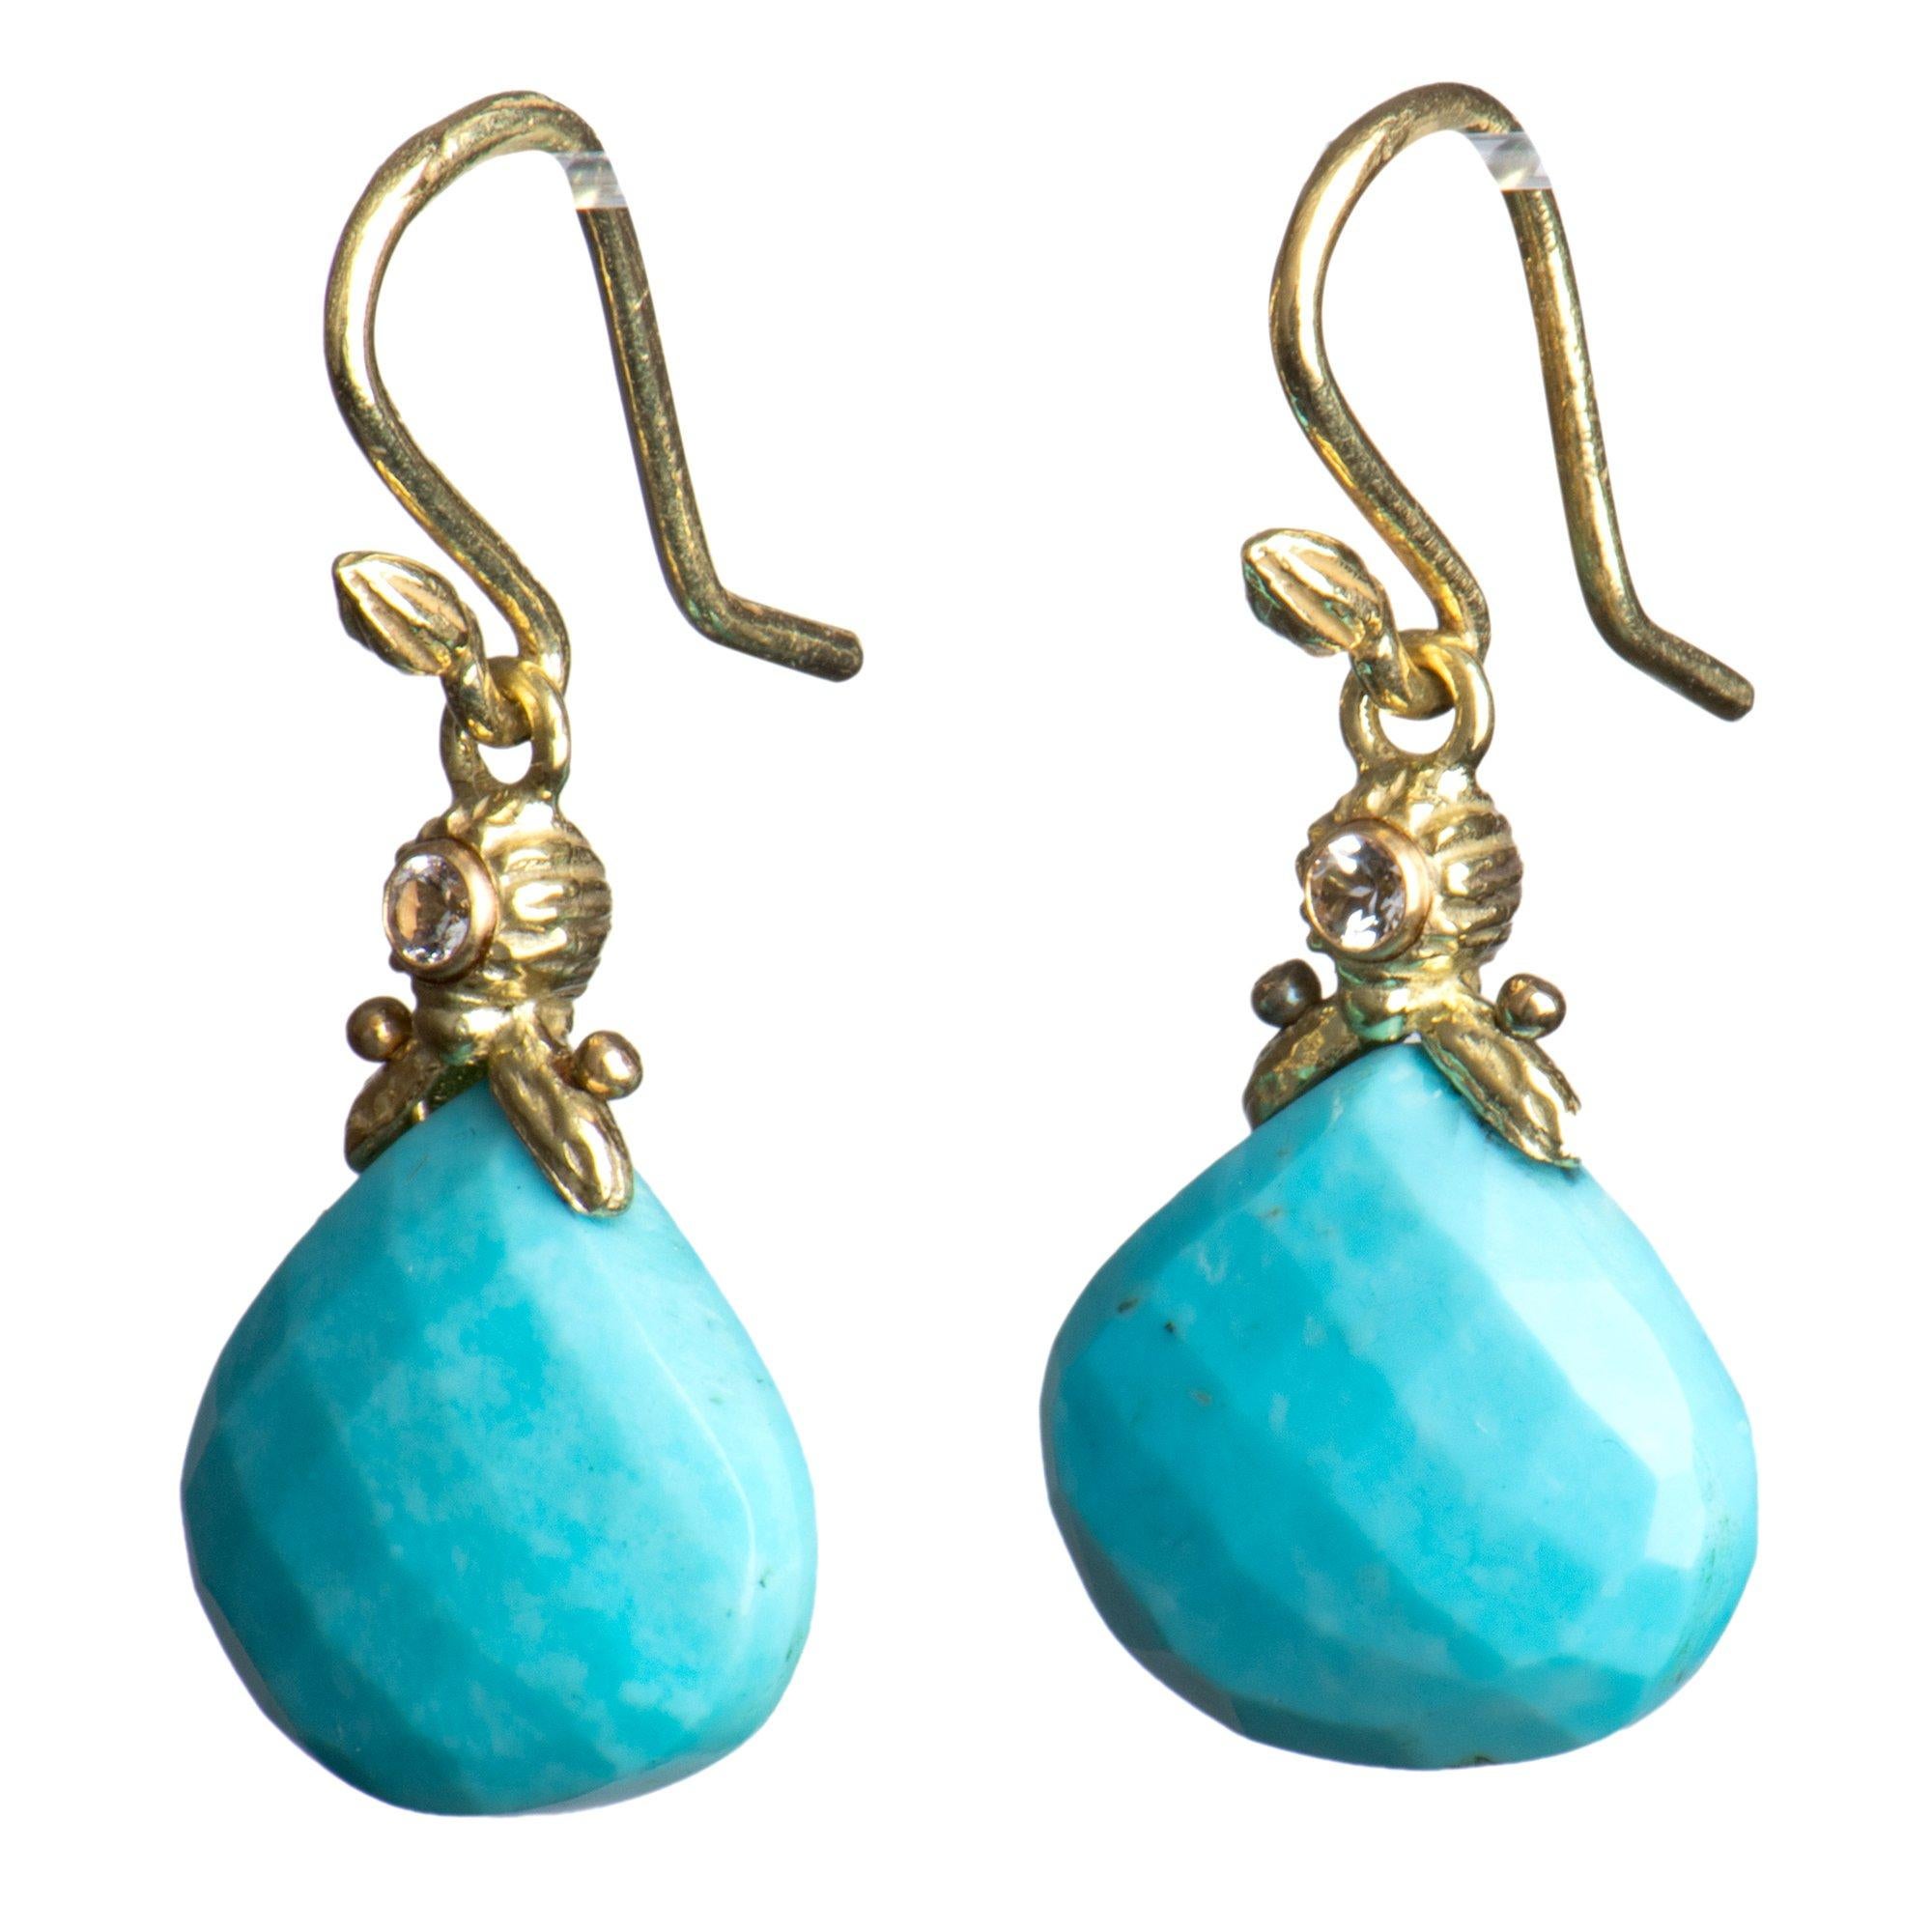 Sleeping Beauty is more than a fairytale: it's also a storied turquoise mine in Arizona, that closed in 2012. So you'll treasure these flawless sky-blue Sleeping Beauty turquoise earrings, faceted briolettes set into Gabrielle's classic 18k baby